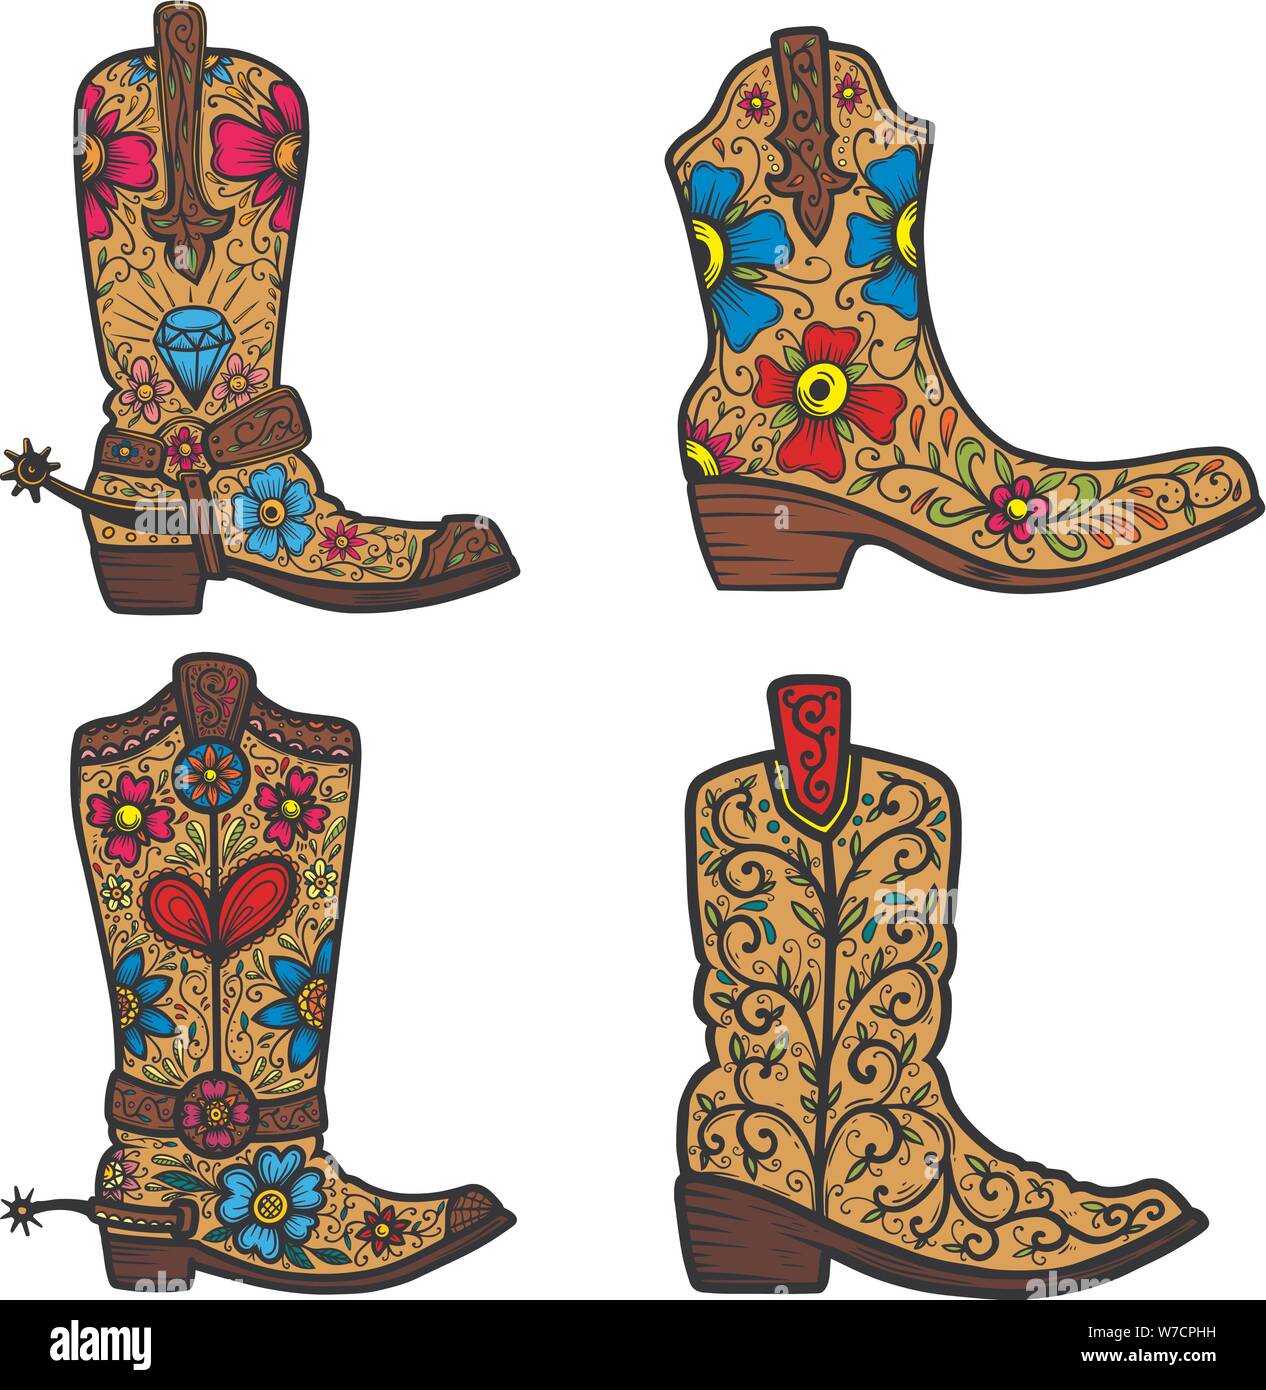 Set of Cowboy boot with floral pattern.  Design element for poster, t shirt, emblem, sign. Stock Vector